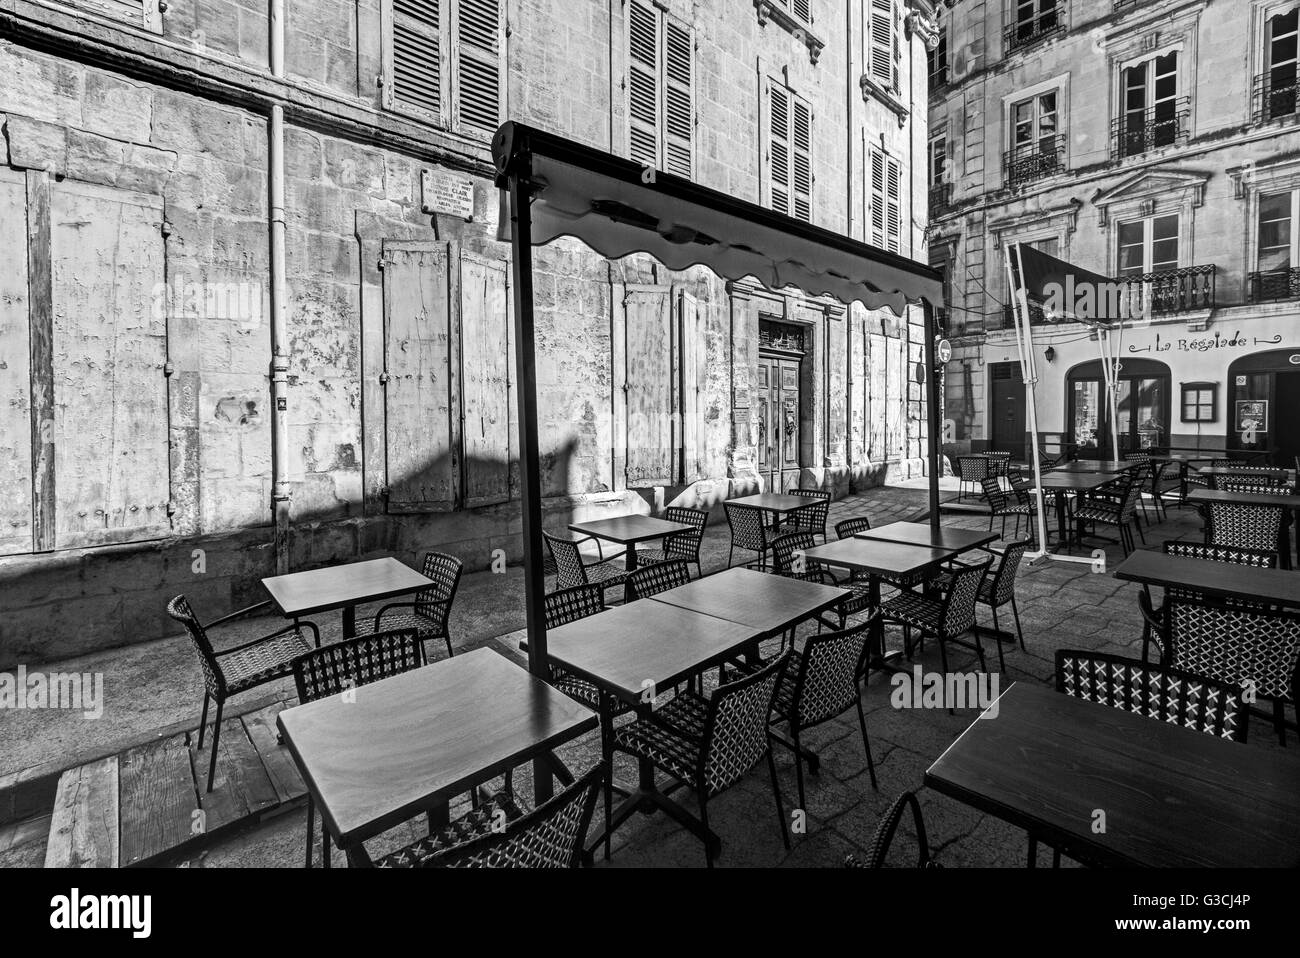 Restaurant terrace in Arles, Bouches-du-Rhone, Provence-Alpes-Cote d'Azur, Southern France, France, Europe, Stock Photo